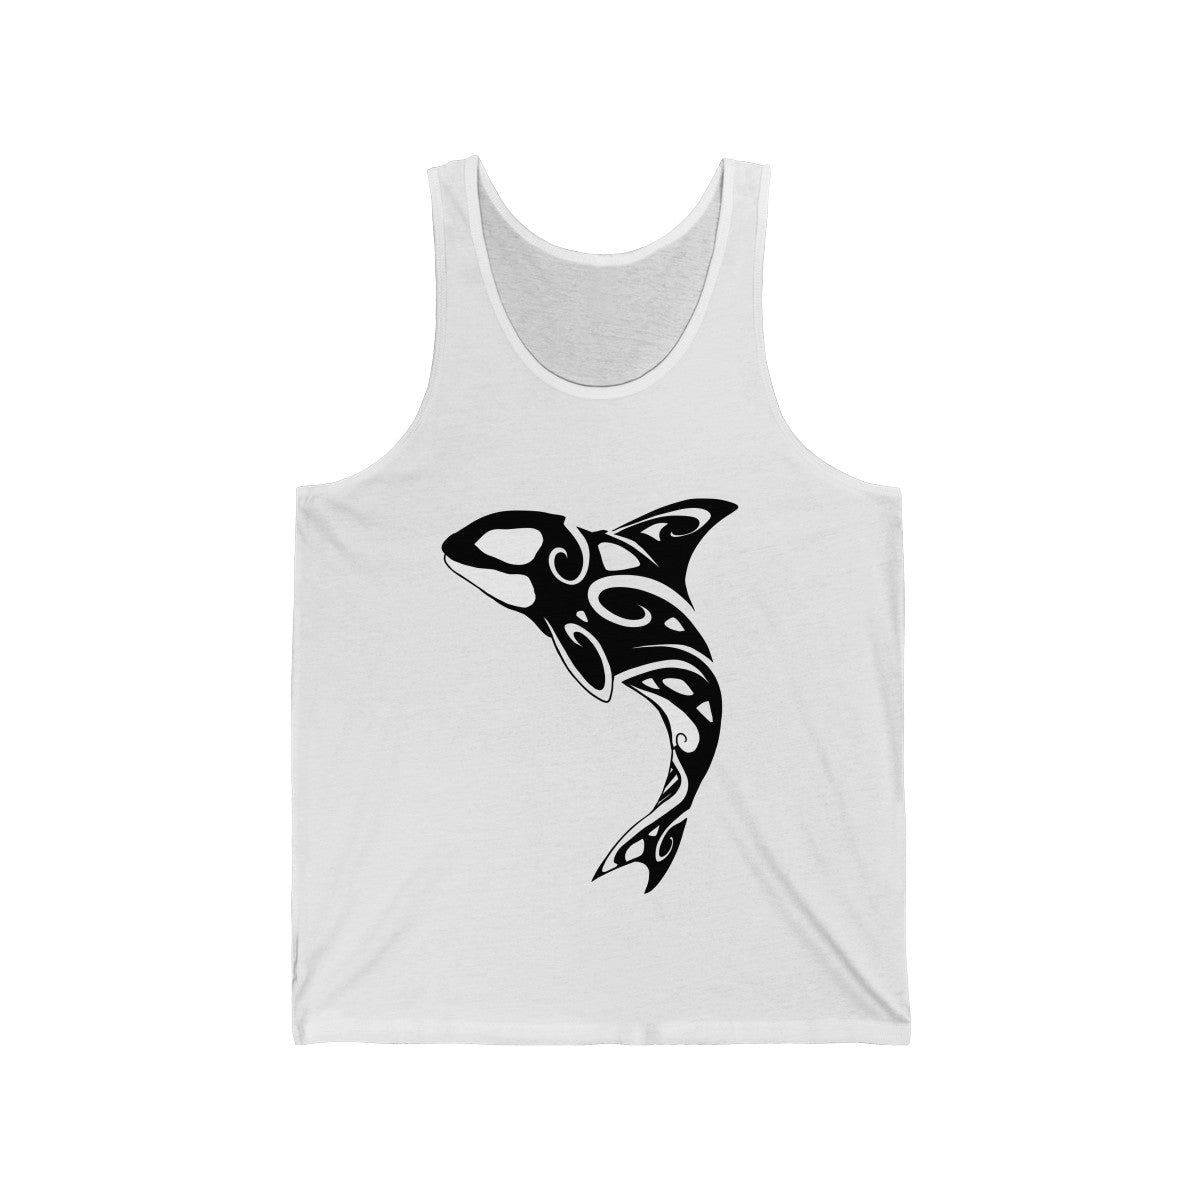 Orca - Tank Top Tank Top Dire Creatures White XS 